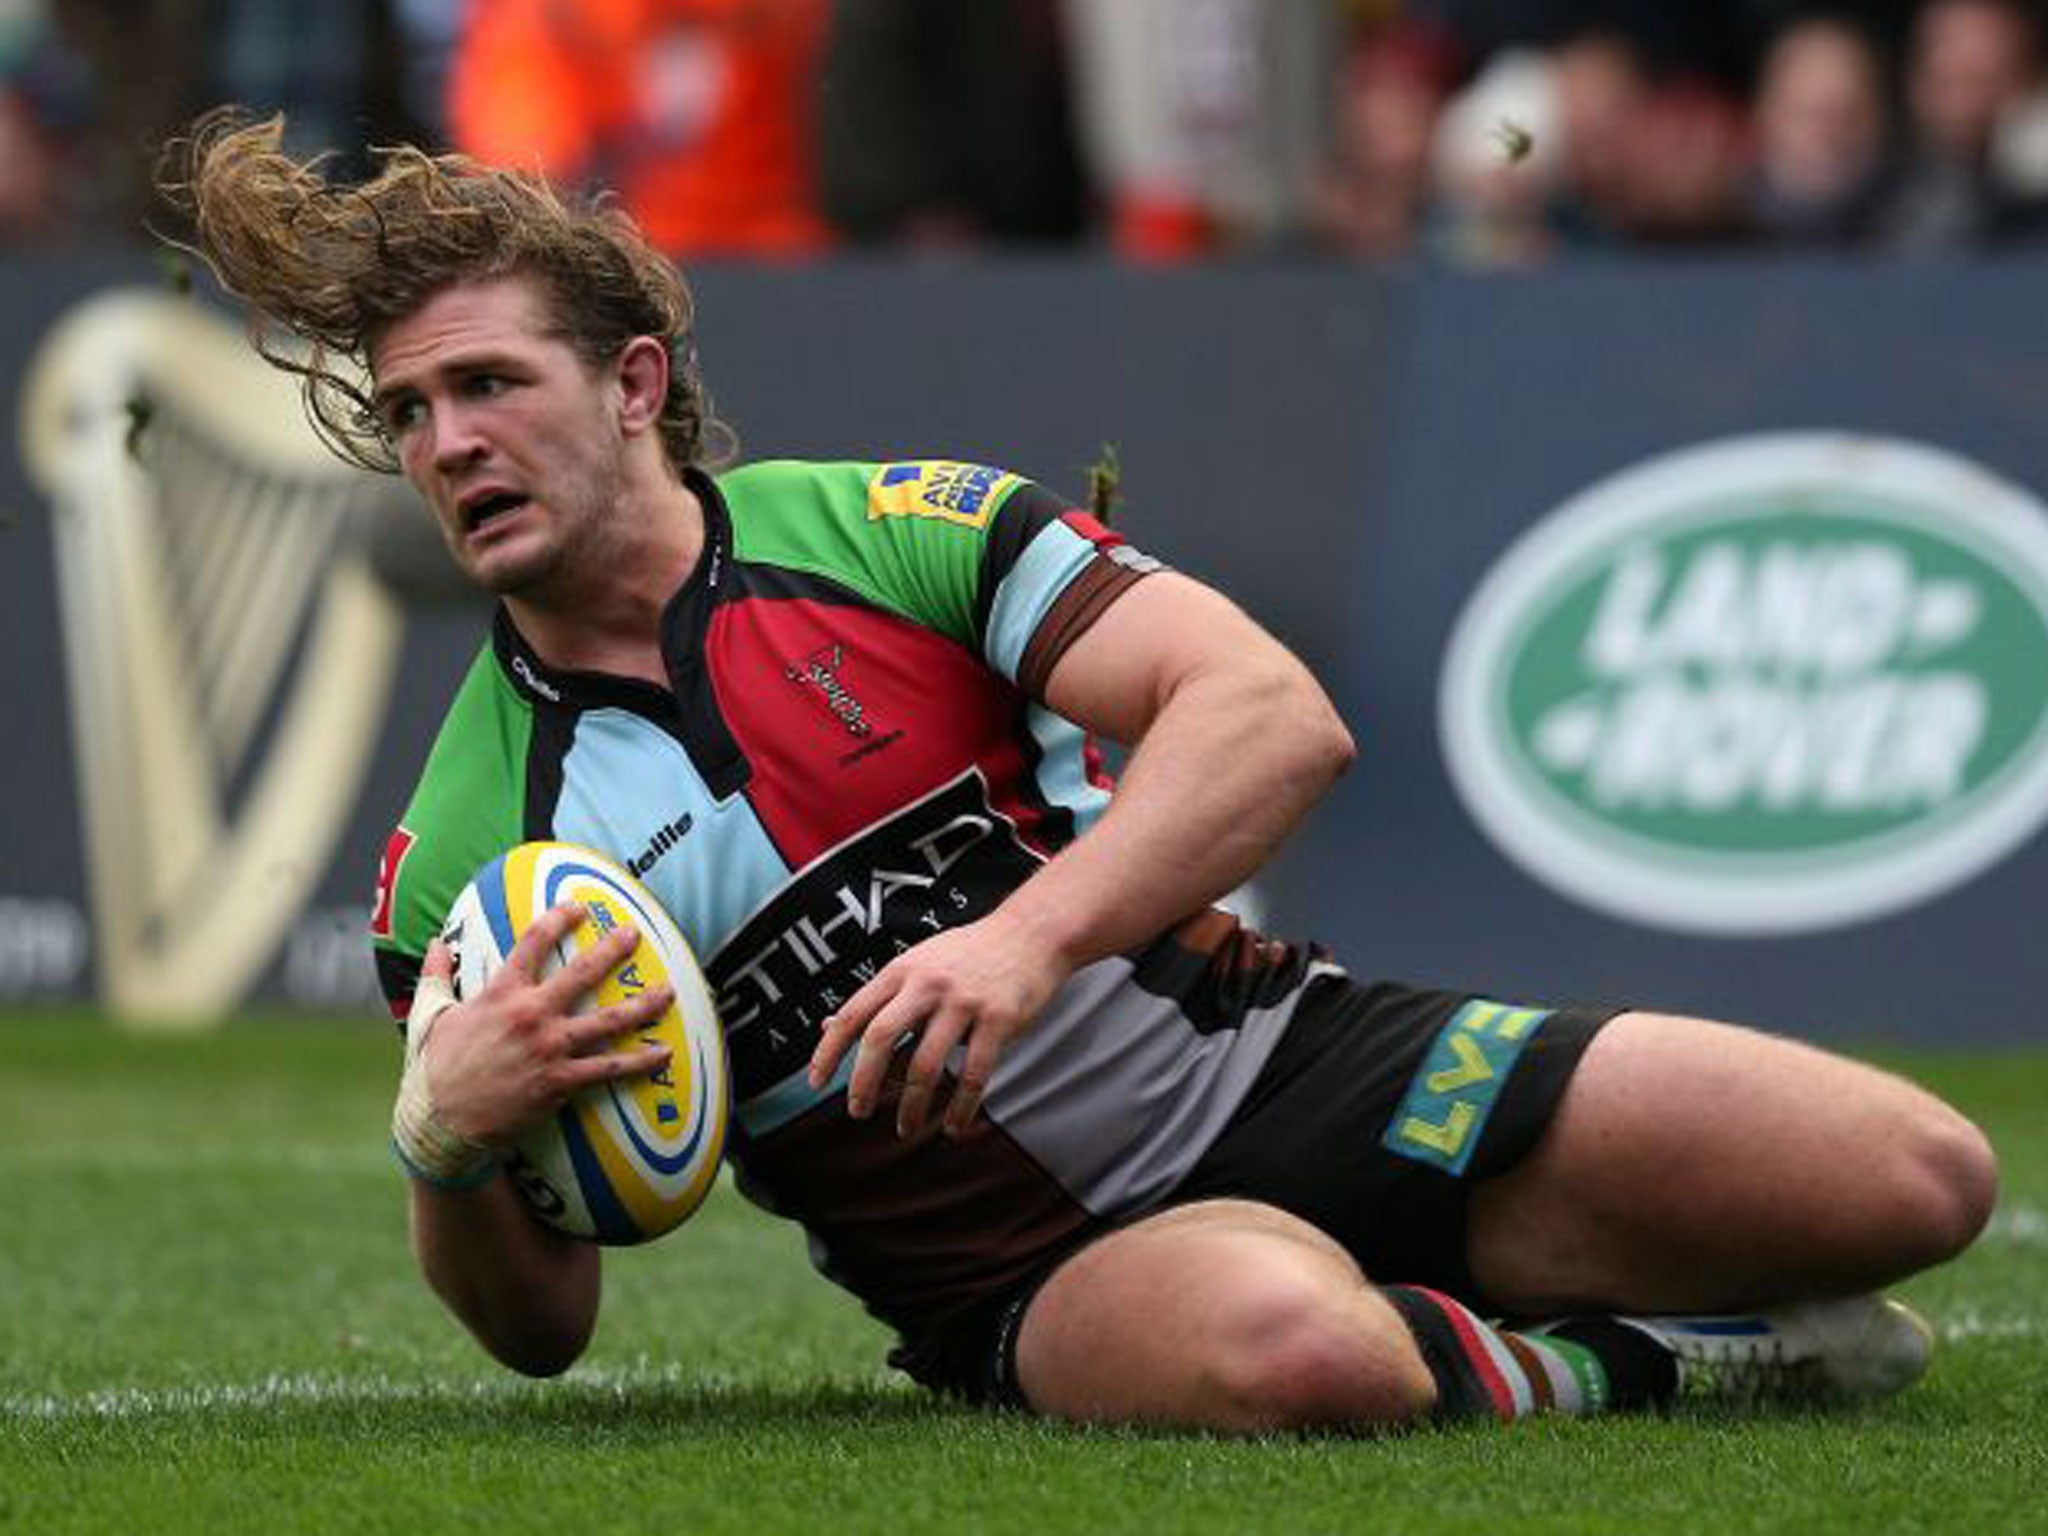 Luke Wallace scores the opening try for Harlequins